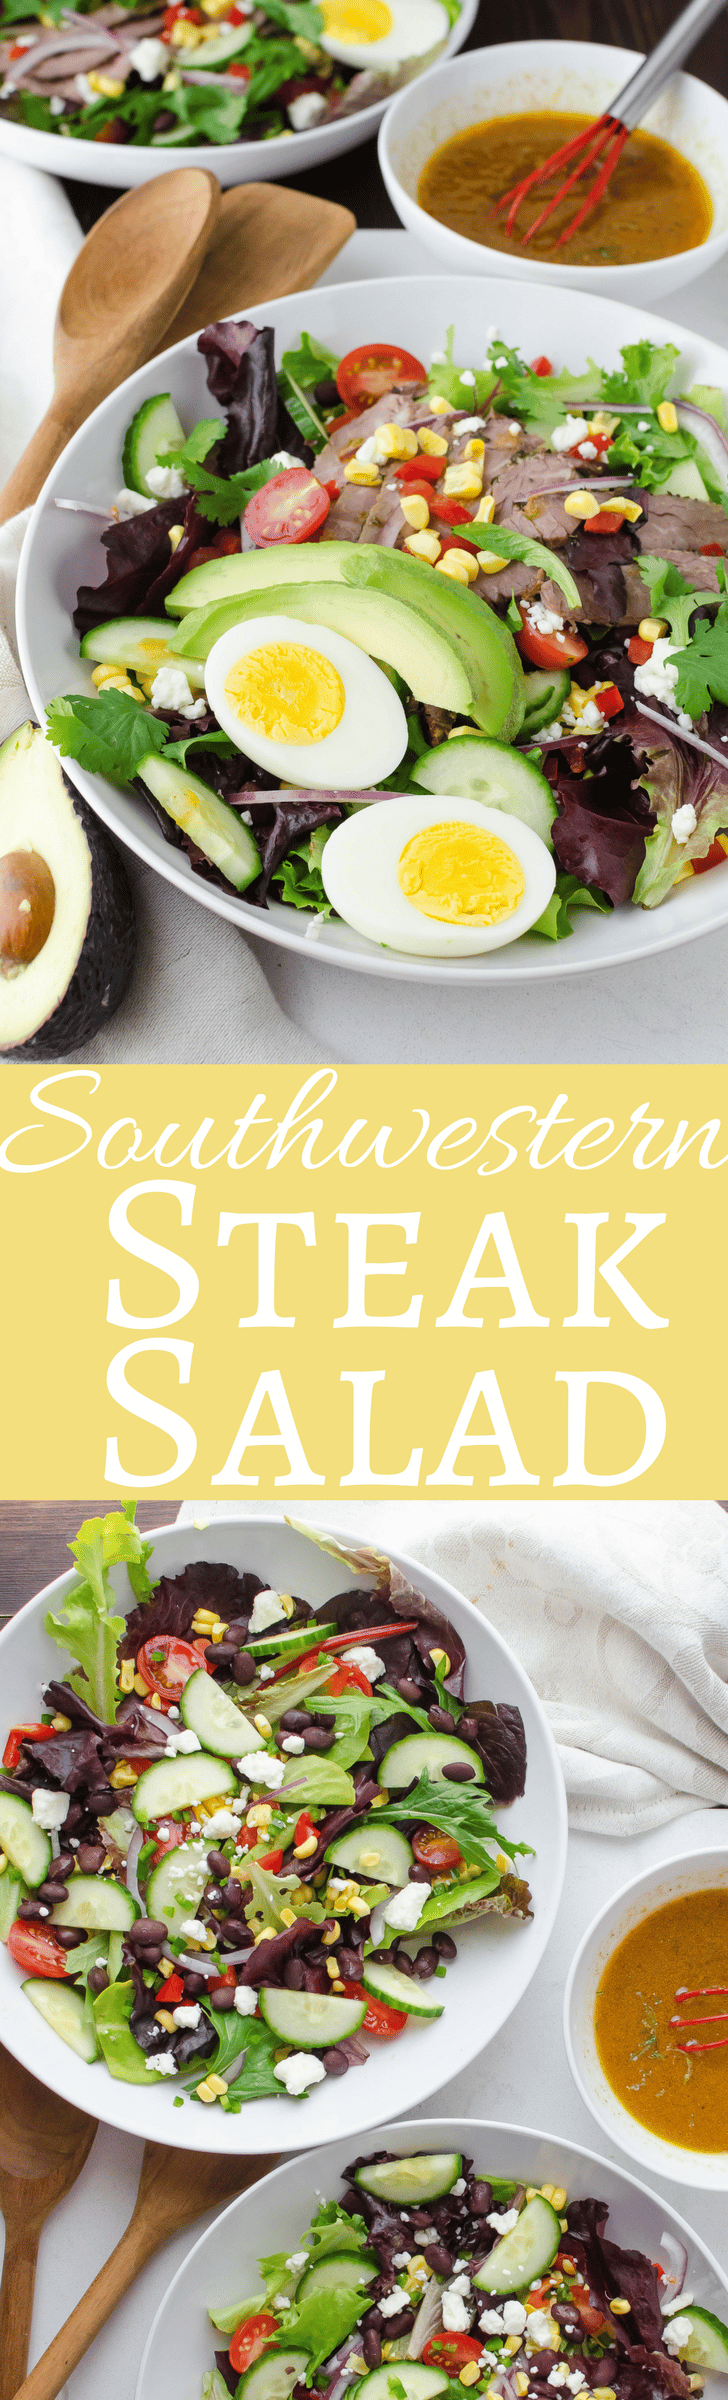 Use everyday pantry ingredients and leftover steak for this easy recipe for Southwestern Steak Salad! Ready in minutes!